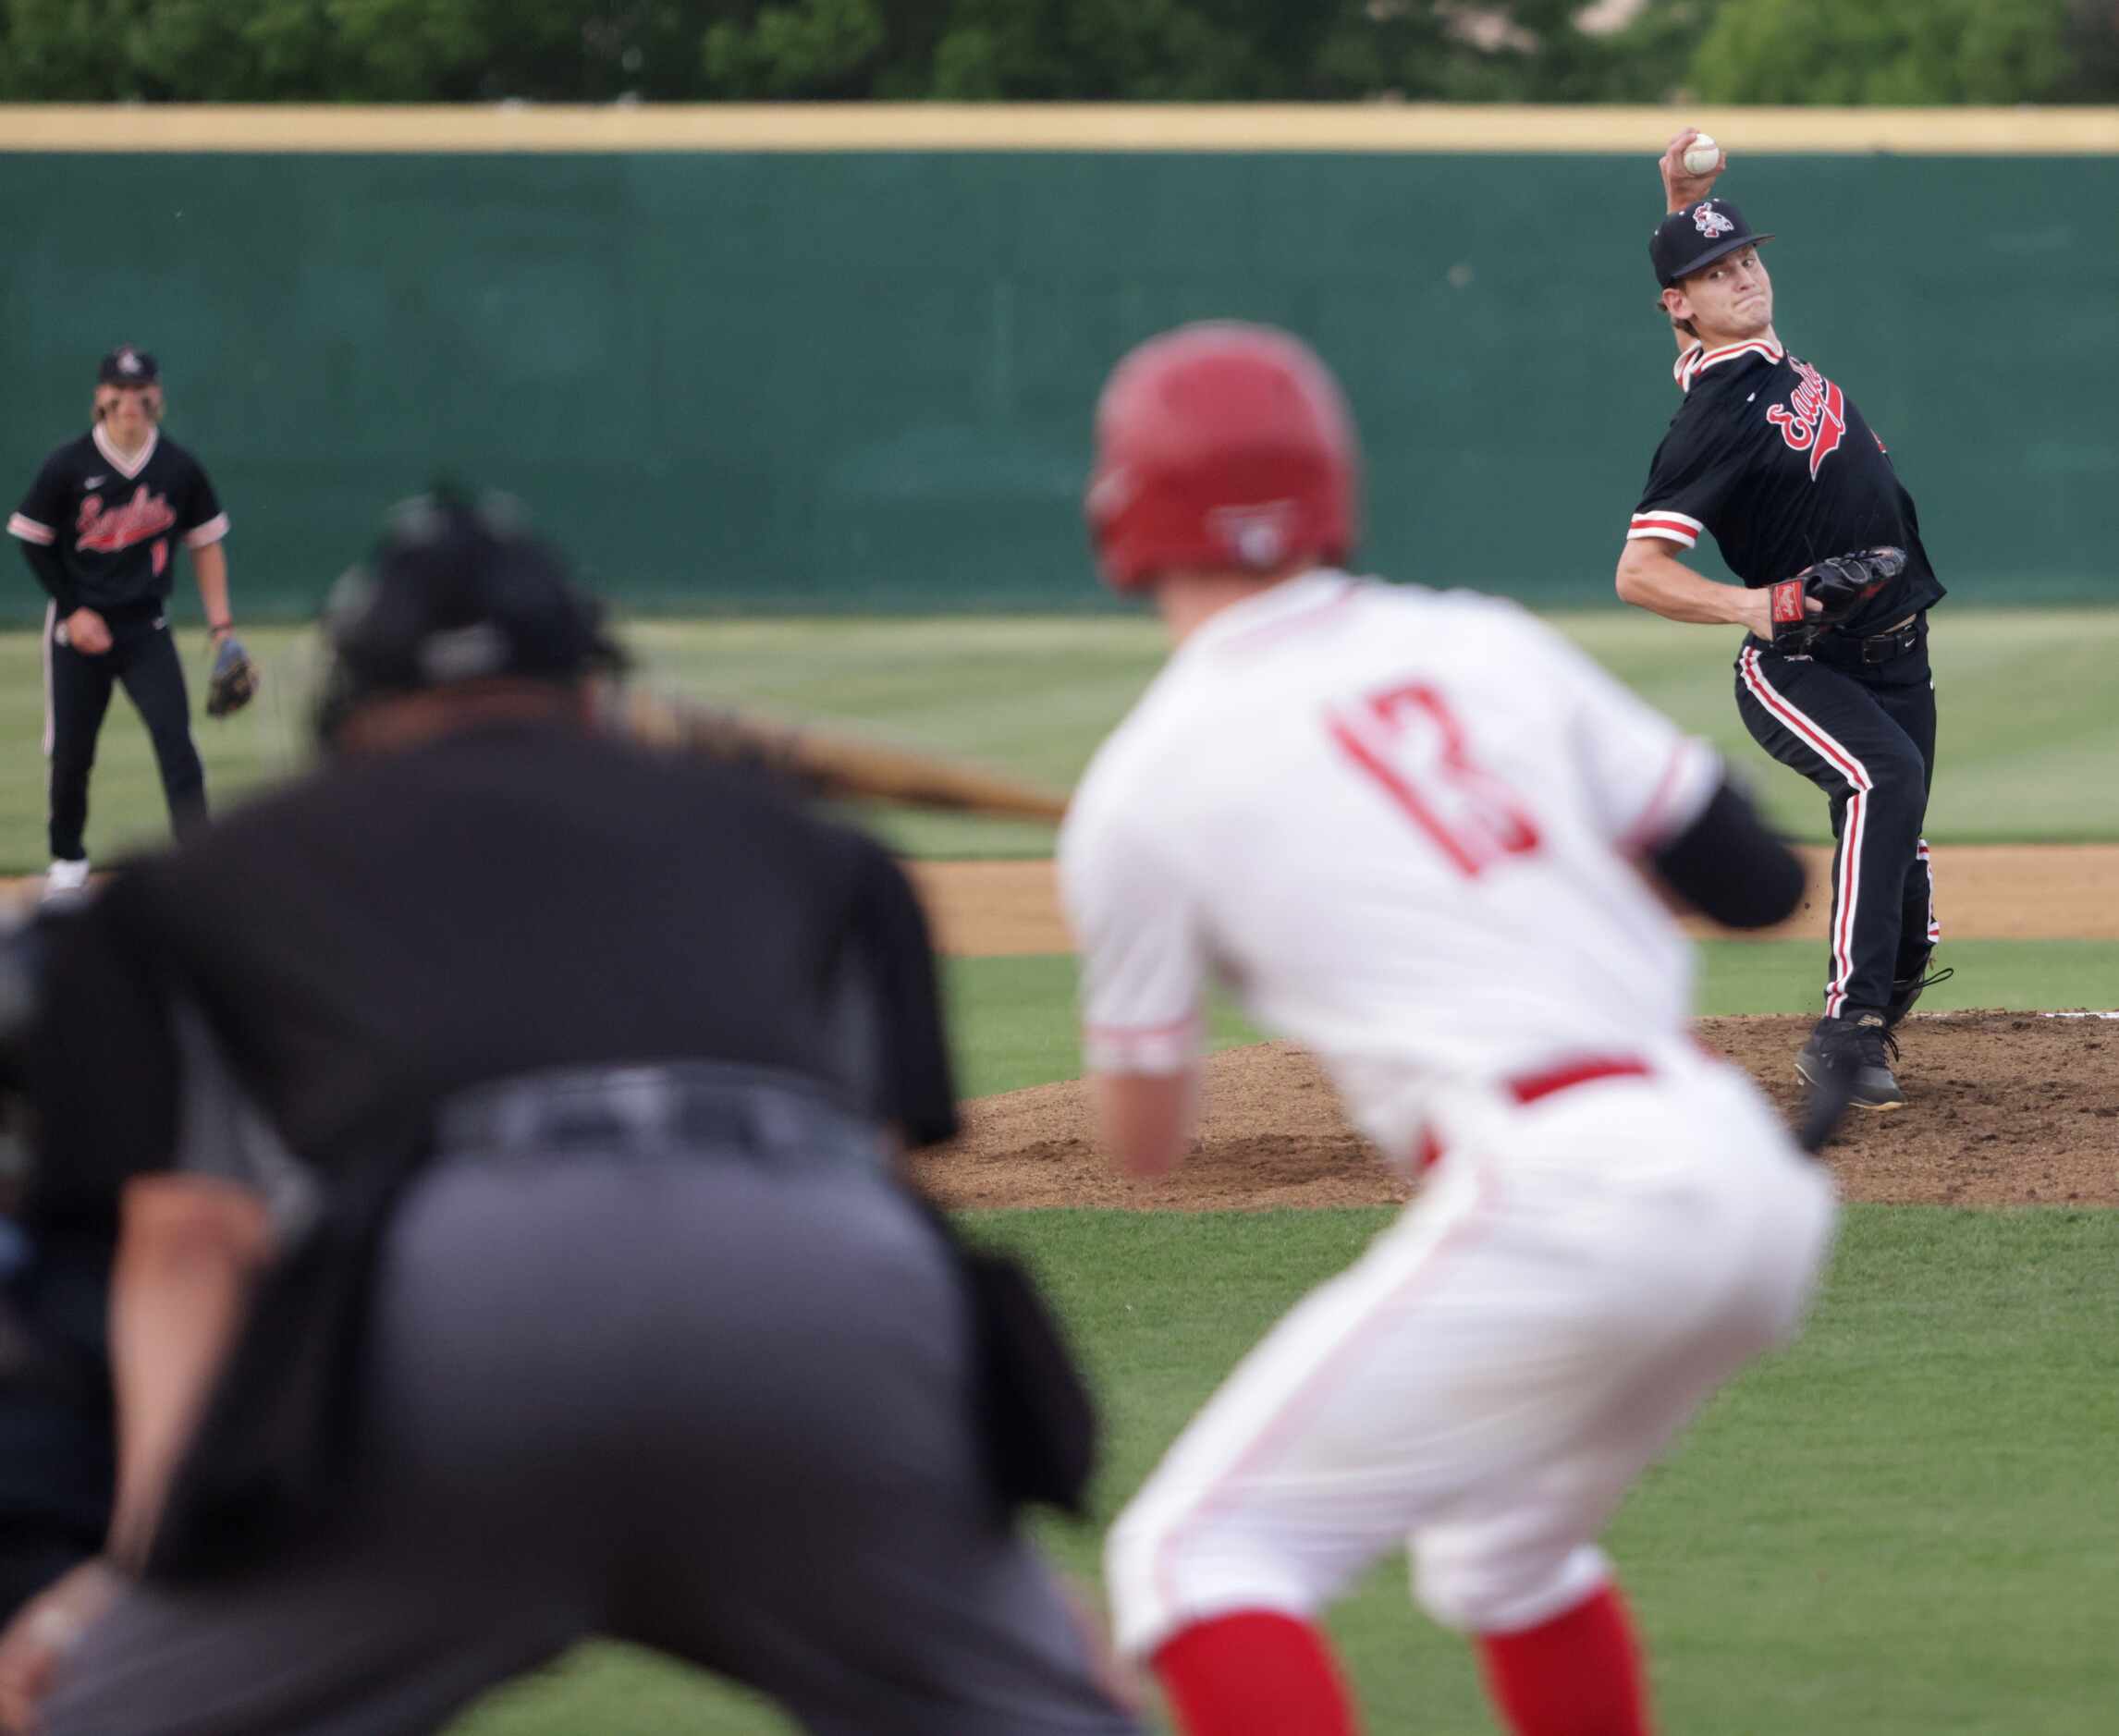 Argyle High School player Alex D'Angelo pitches against Grapevine High School player Peyton...